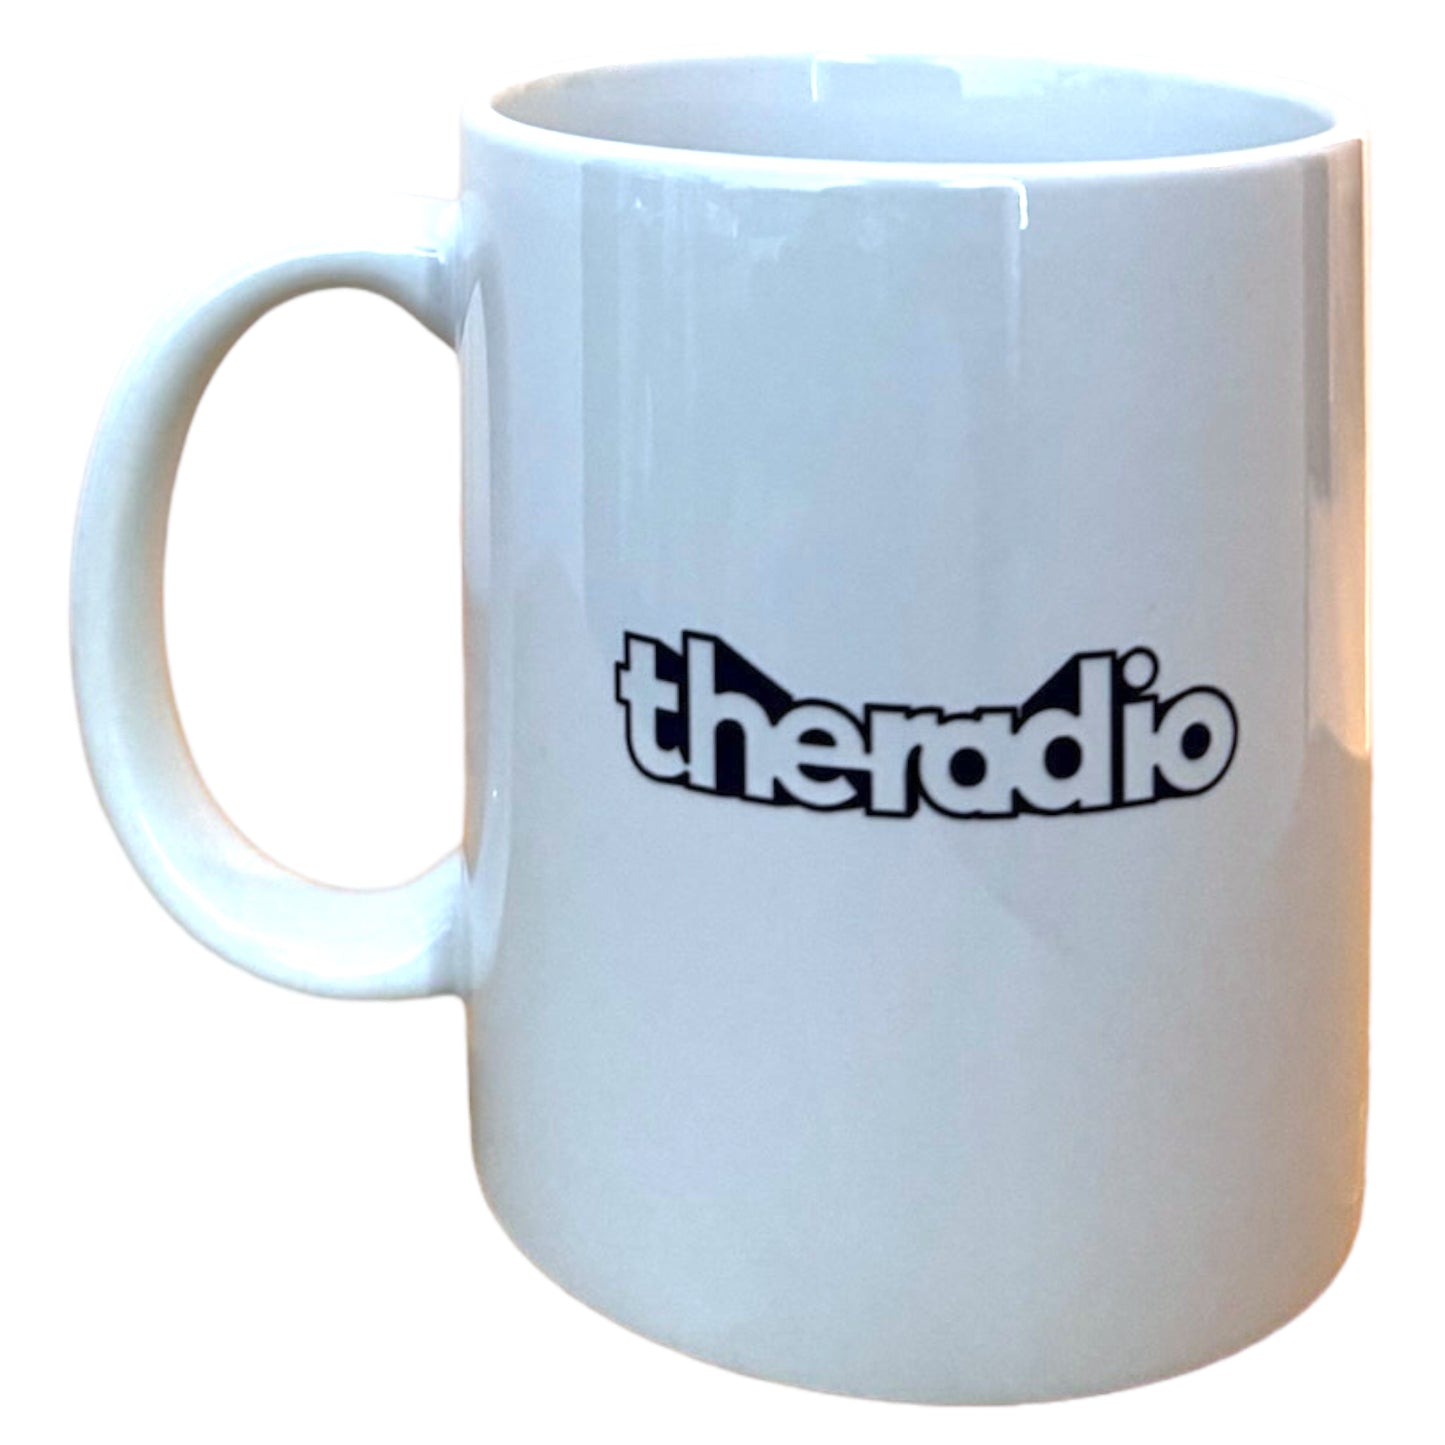 ★ TheRadio ～ ICON CUP ★